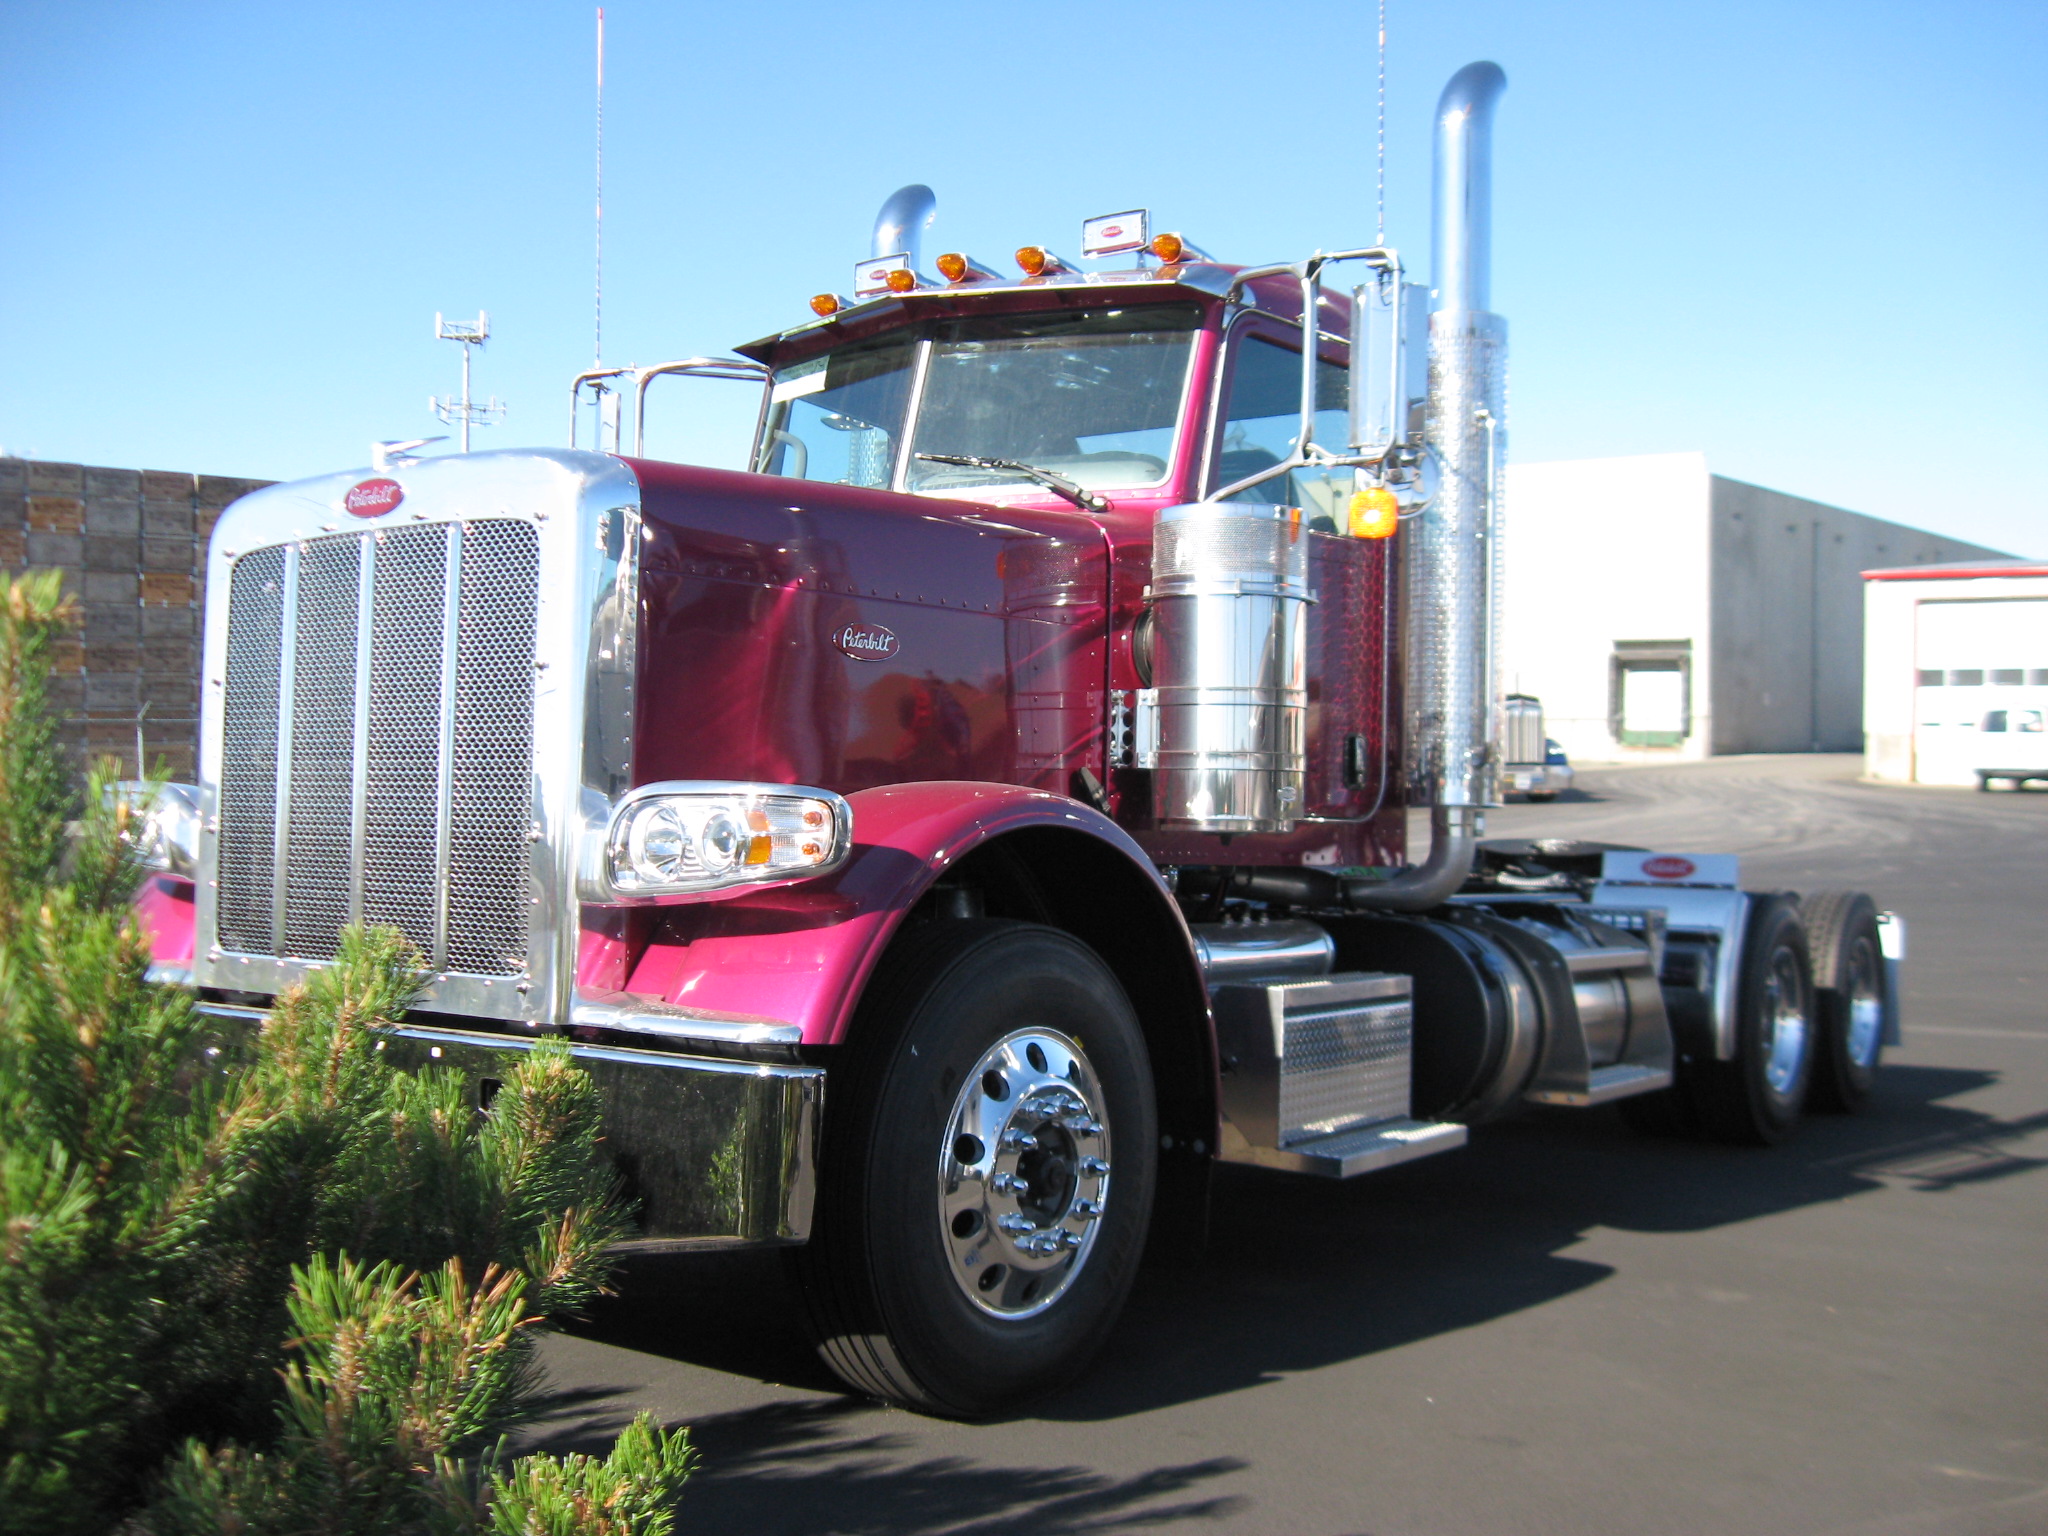 Western Peterbilt: The Best Service Mile After Mile - The Pacific ...